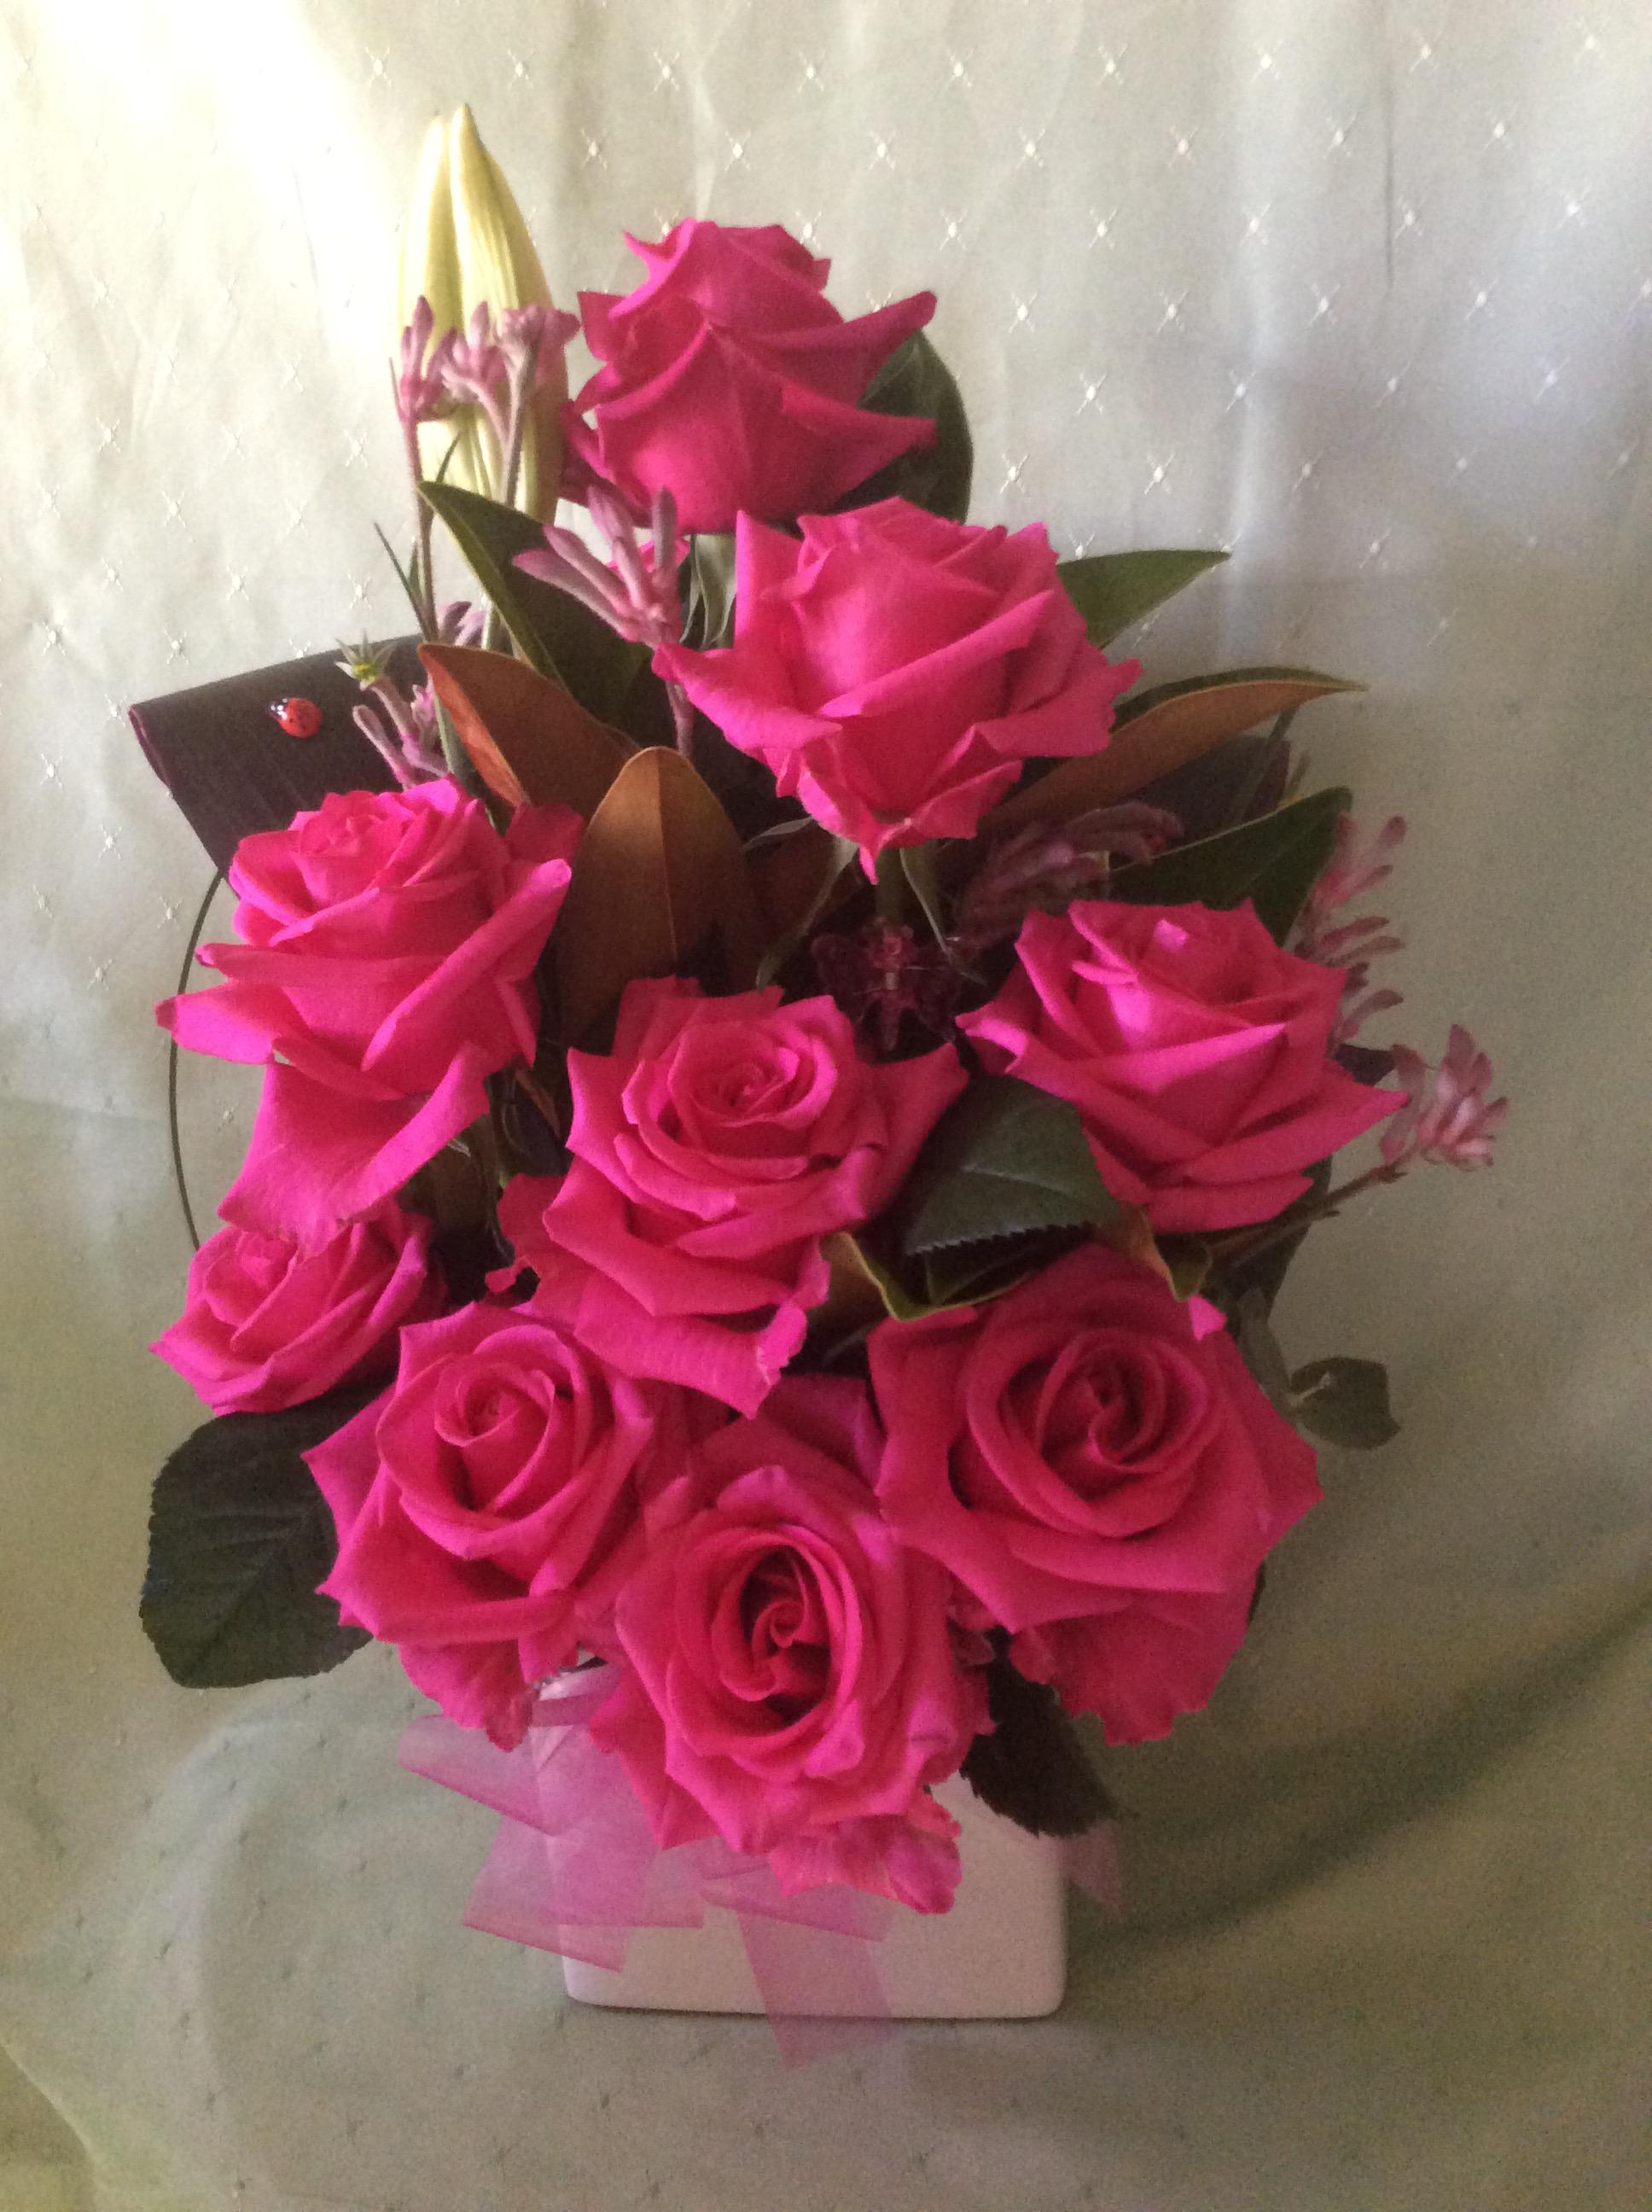 Say it with Roses Fresh Floral Designs Mount Martha 0418 387 132